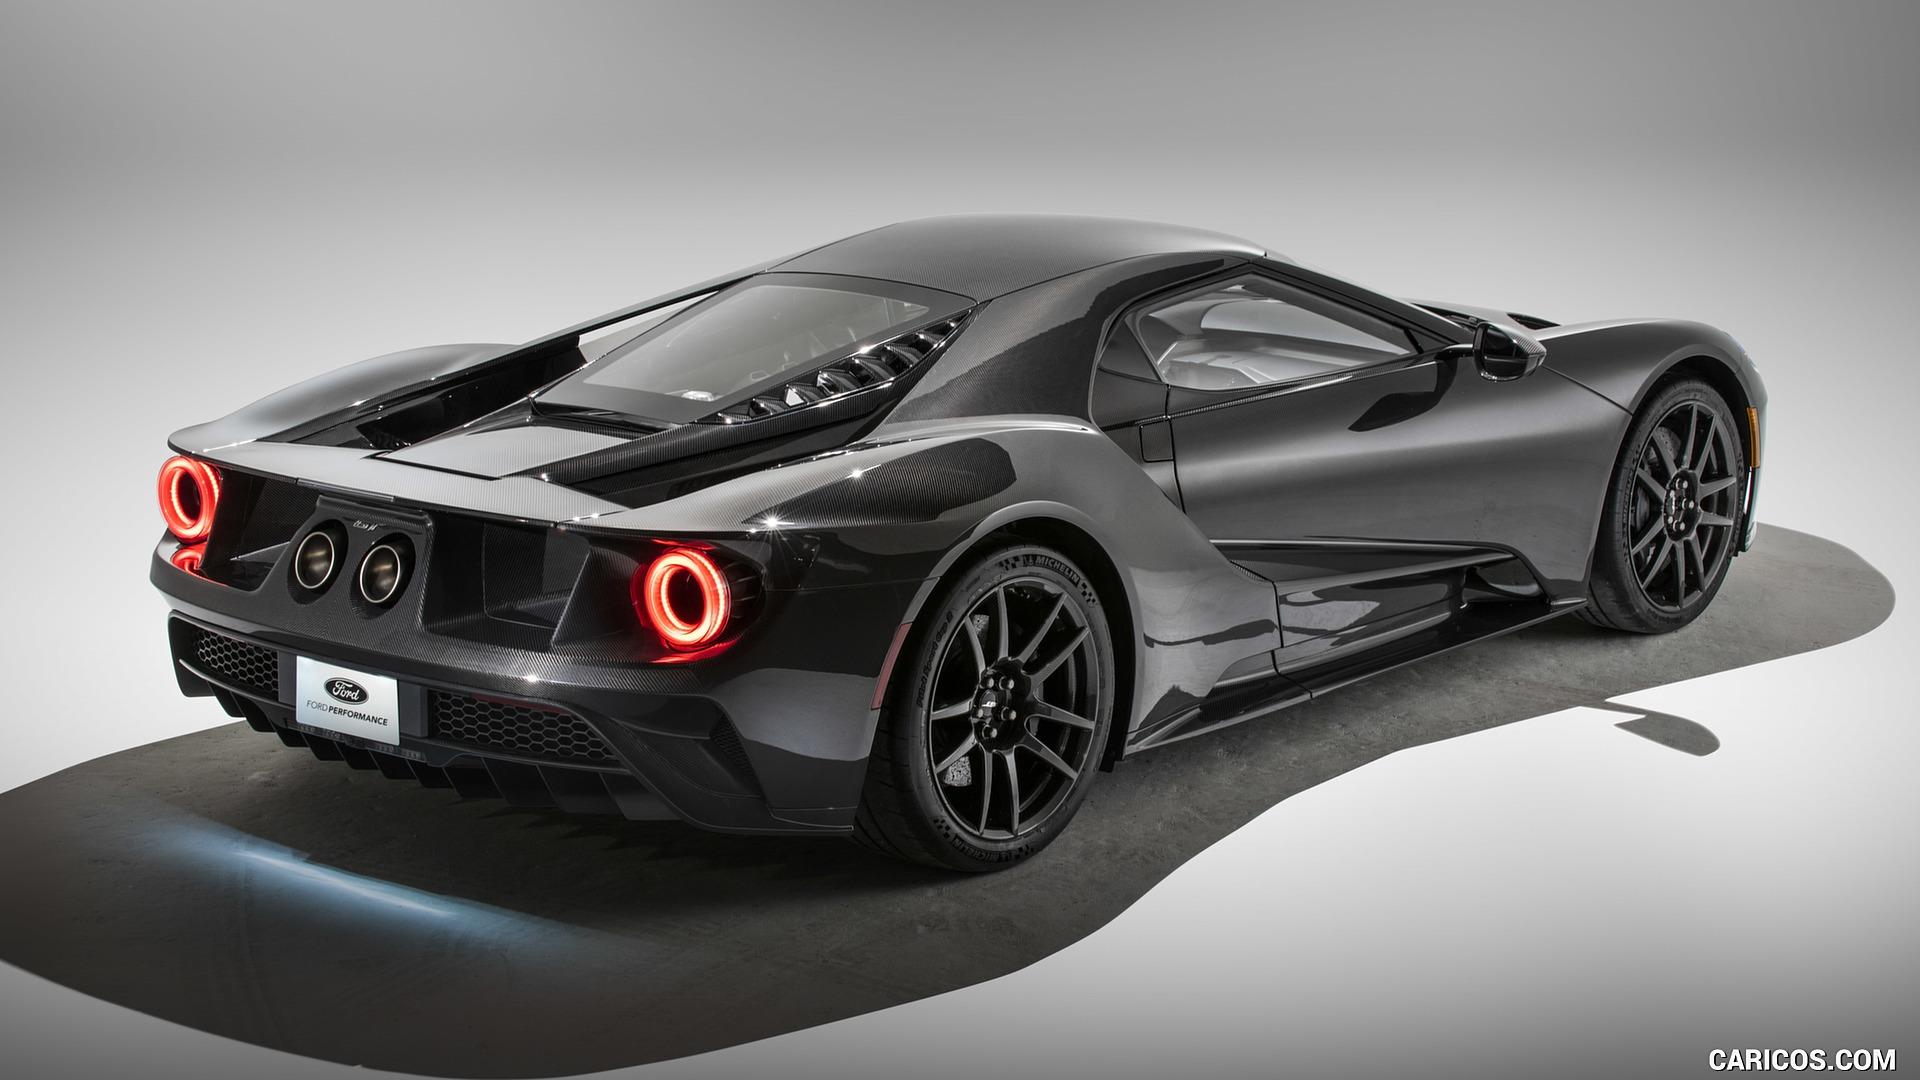 32 2020 Ford Gt Liquid Carbon Wallpapers On Wallpapersafari